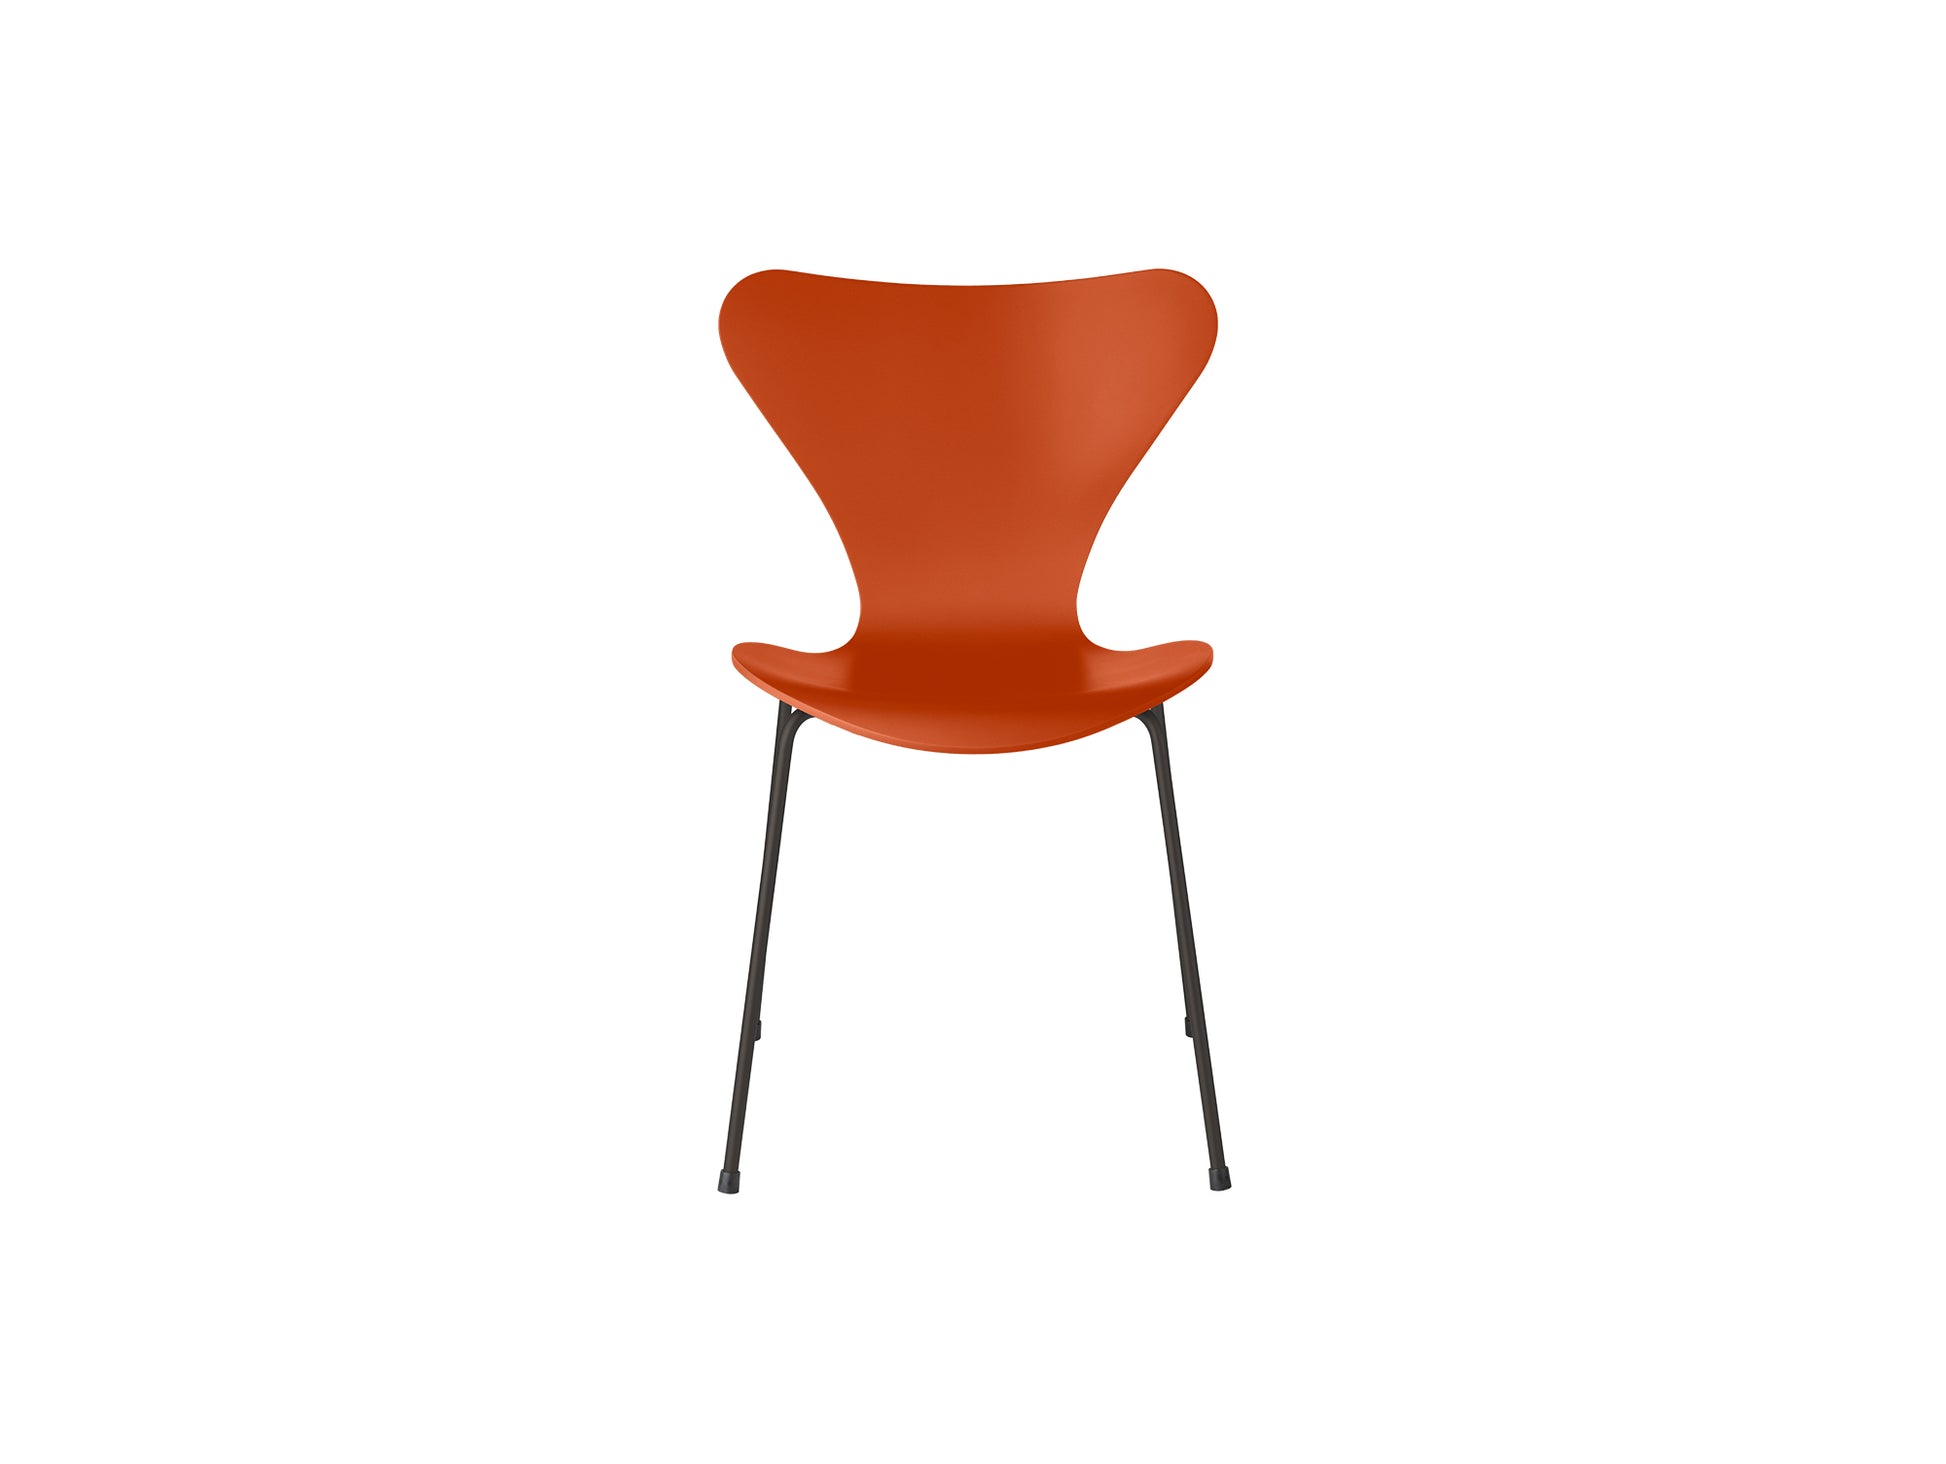 Series 7™ 3107 Dining Chair by Fritz Hansen - Paradise Orange Lacquered Veneer Shell / Warm Graphite Steel